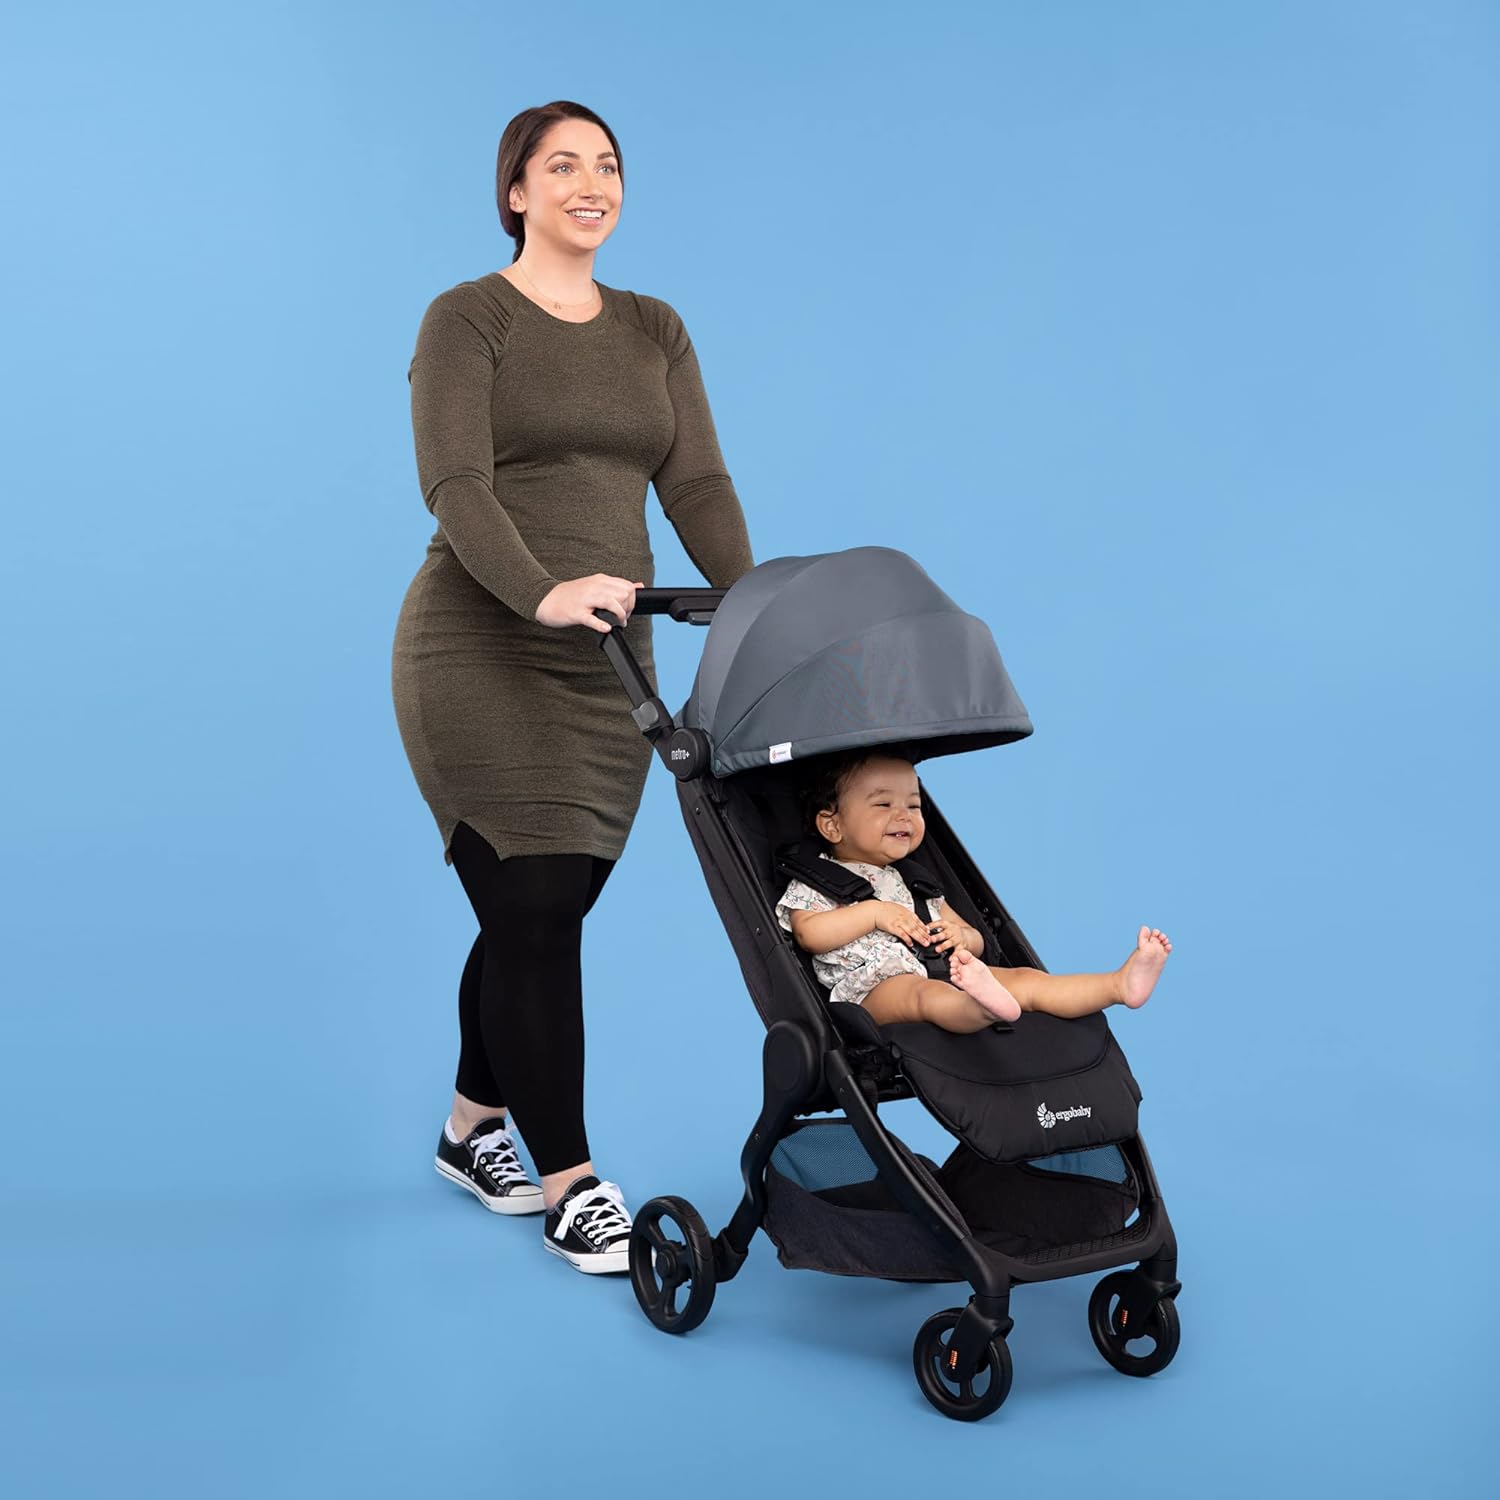 Ergobaby Metro+ Compact Baby Stroller, Lightweight Umbrella Stroller Folds Down for Overhead Airplane Storage (Carries up to 50 lbs), Car Seat Compatible, Black - Ergobaby Metro+ Compact Baby Stroller Review